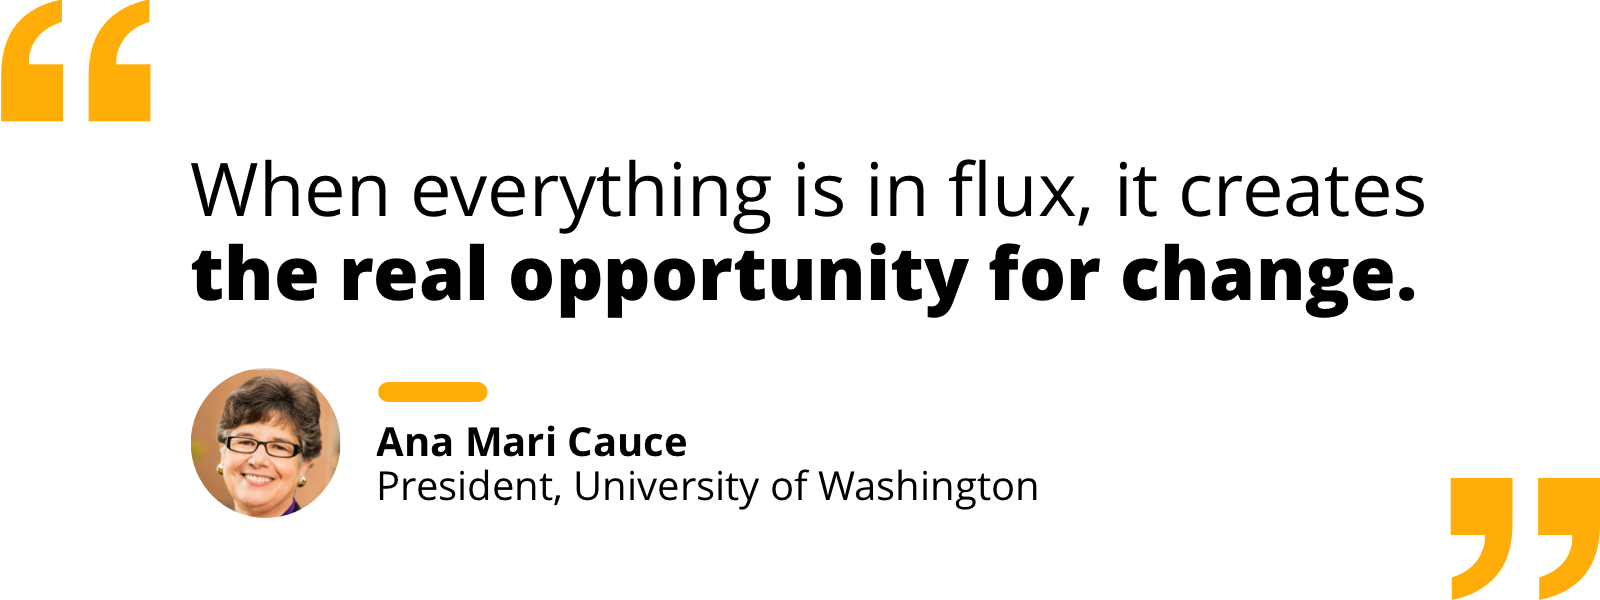 Quote by Ana Marie Cauce: ”When everything is in flux, it creates the real opportunity for change."